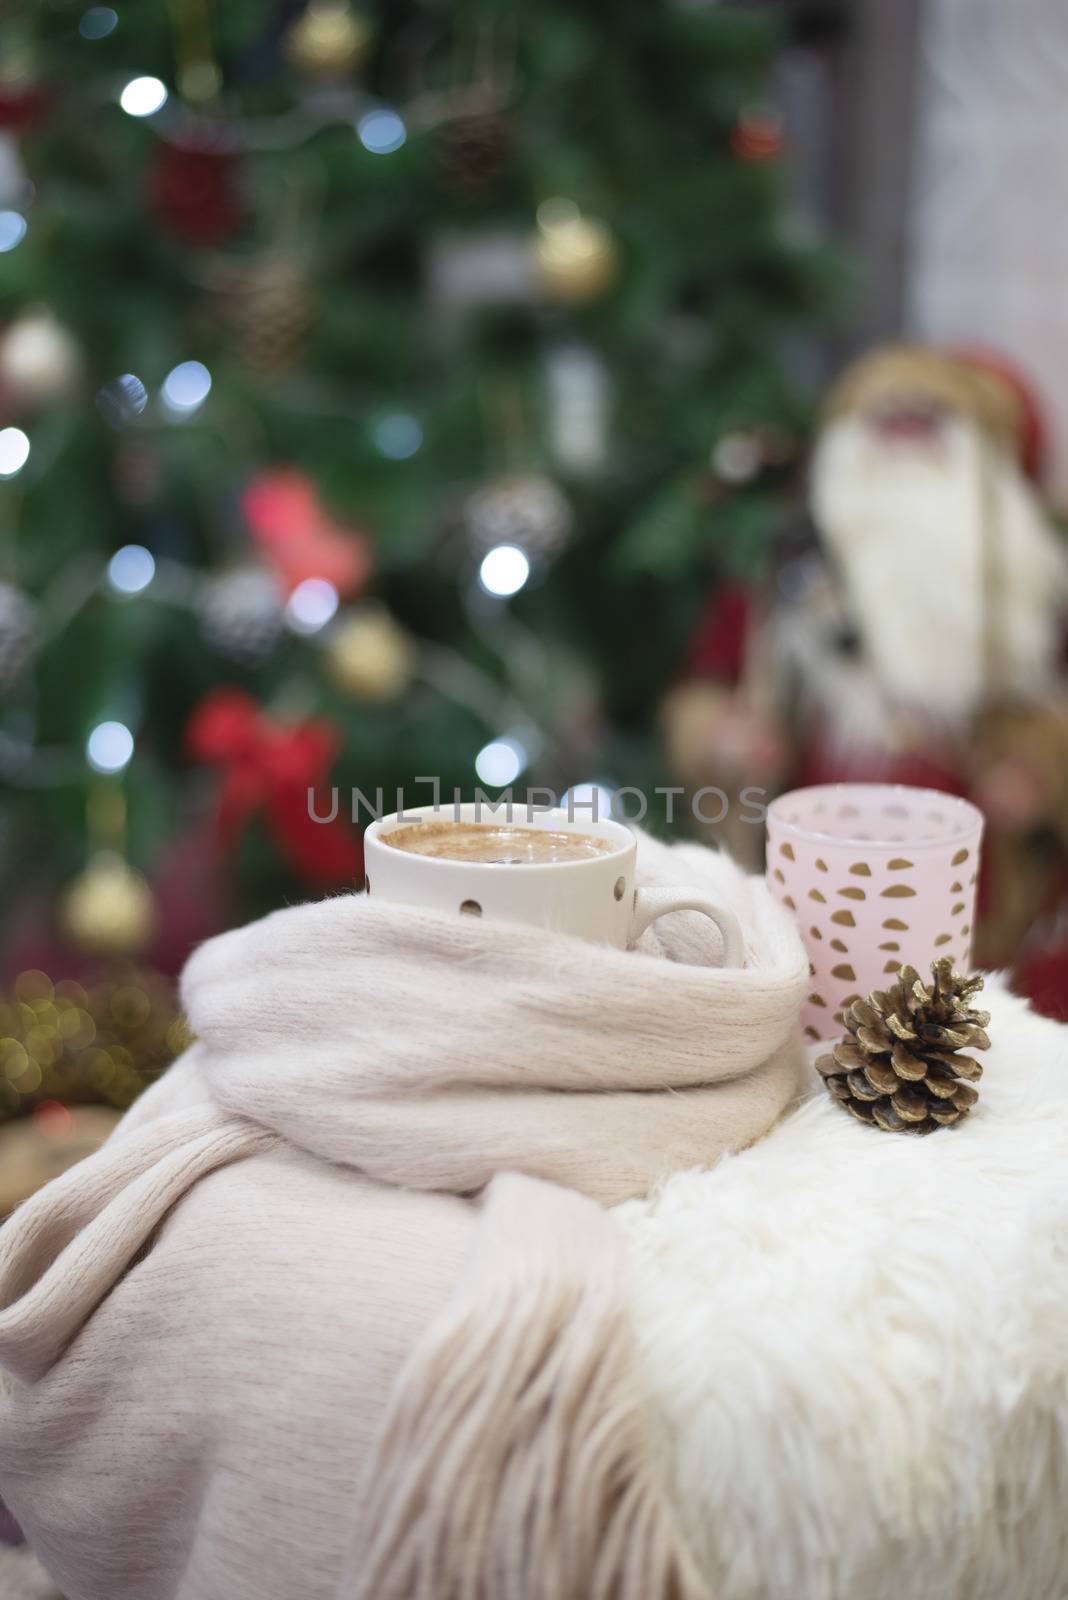 Christmas time. Hot chocolate, a cup of cappuccino on a fur chair in front of a large Christmas tree with balls and lights. Warm scarf, cones around.